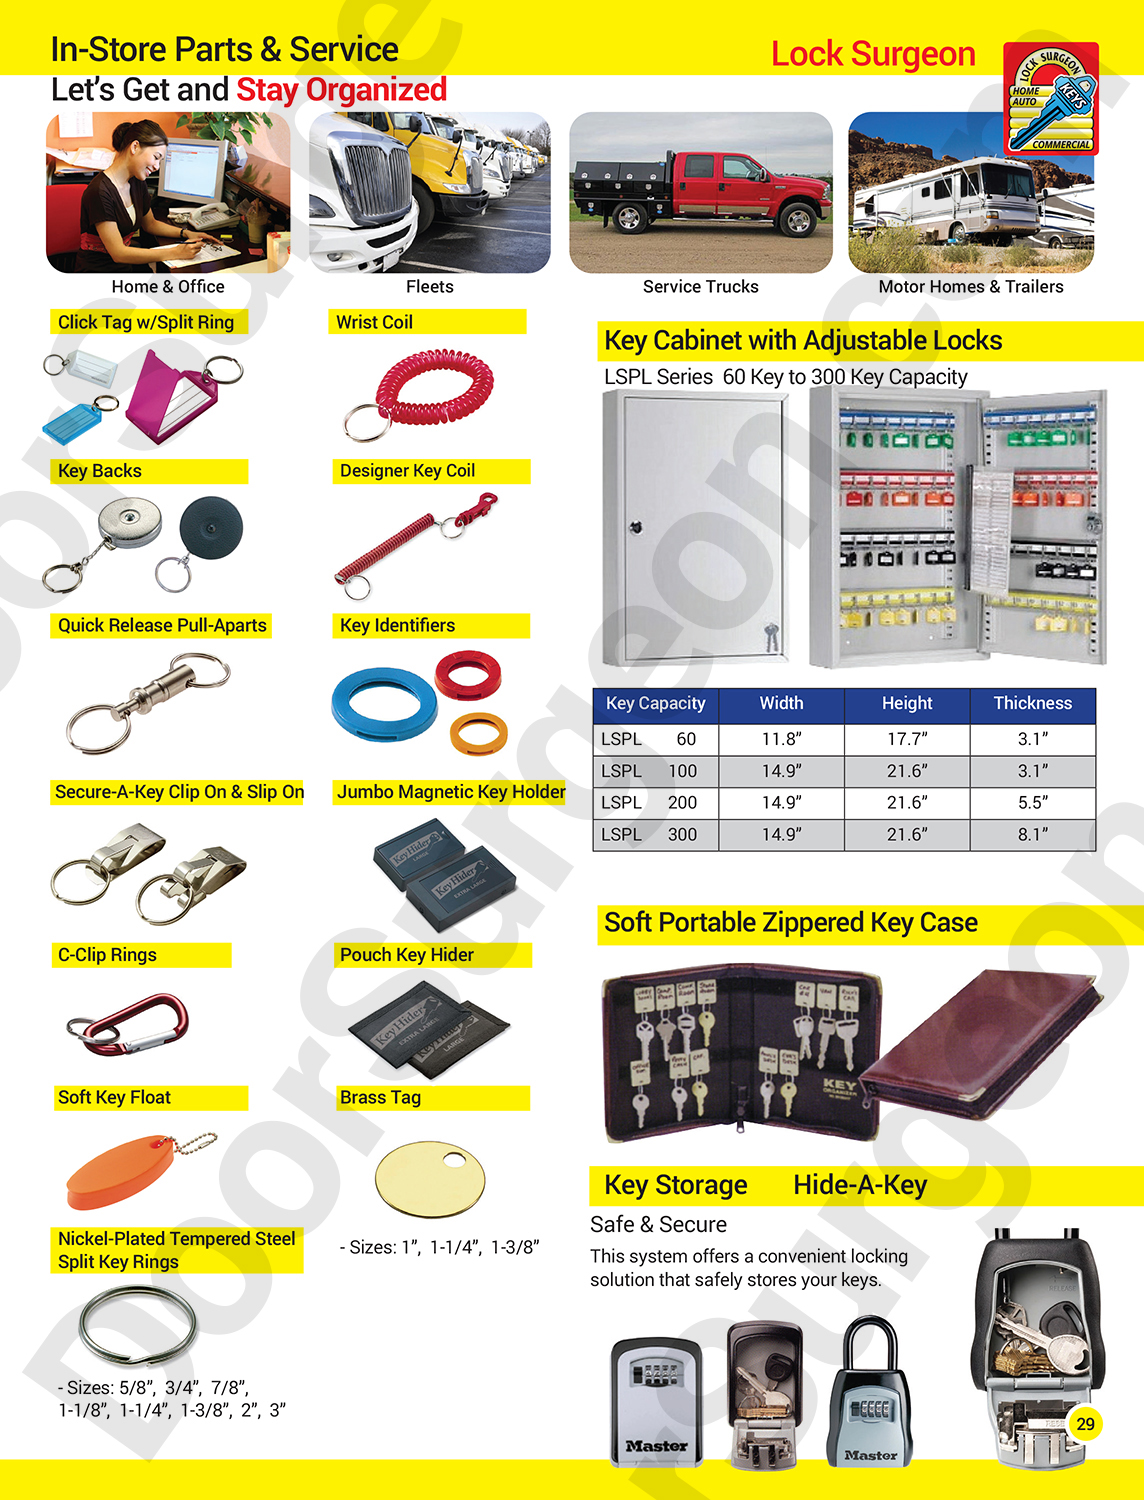 In-store producst to help you stay organized click tags wrist coils key backs key identifiers.